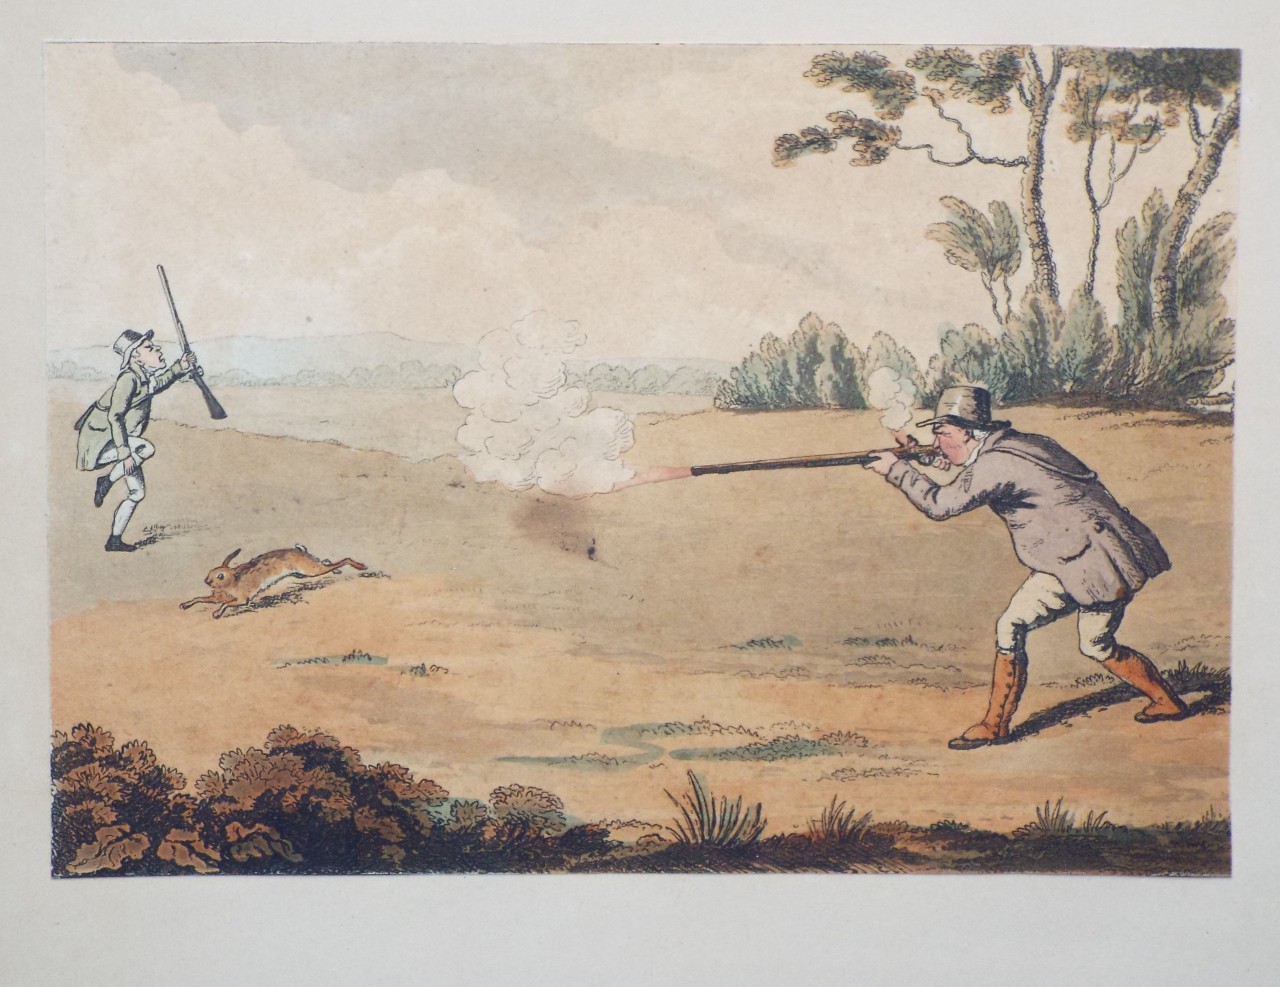 Aquatint - Sportsman firing at hare; second sportsman wounded. - Woodman